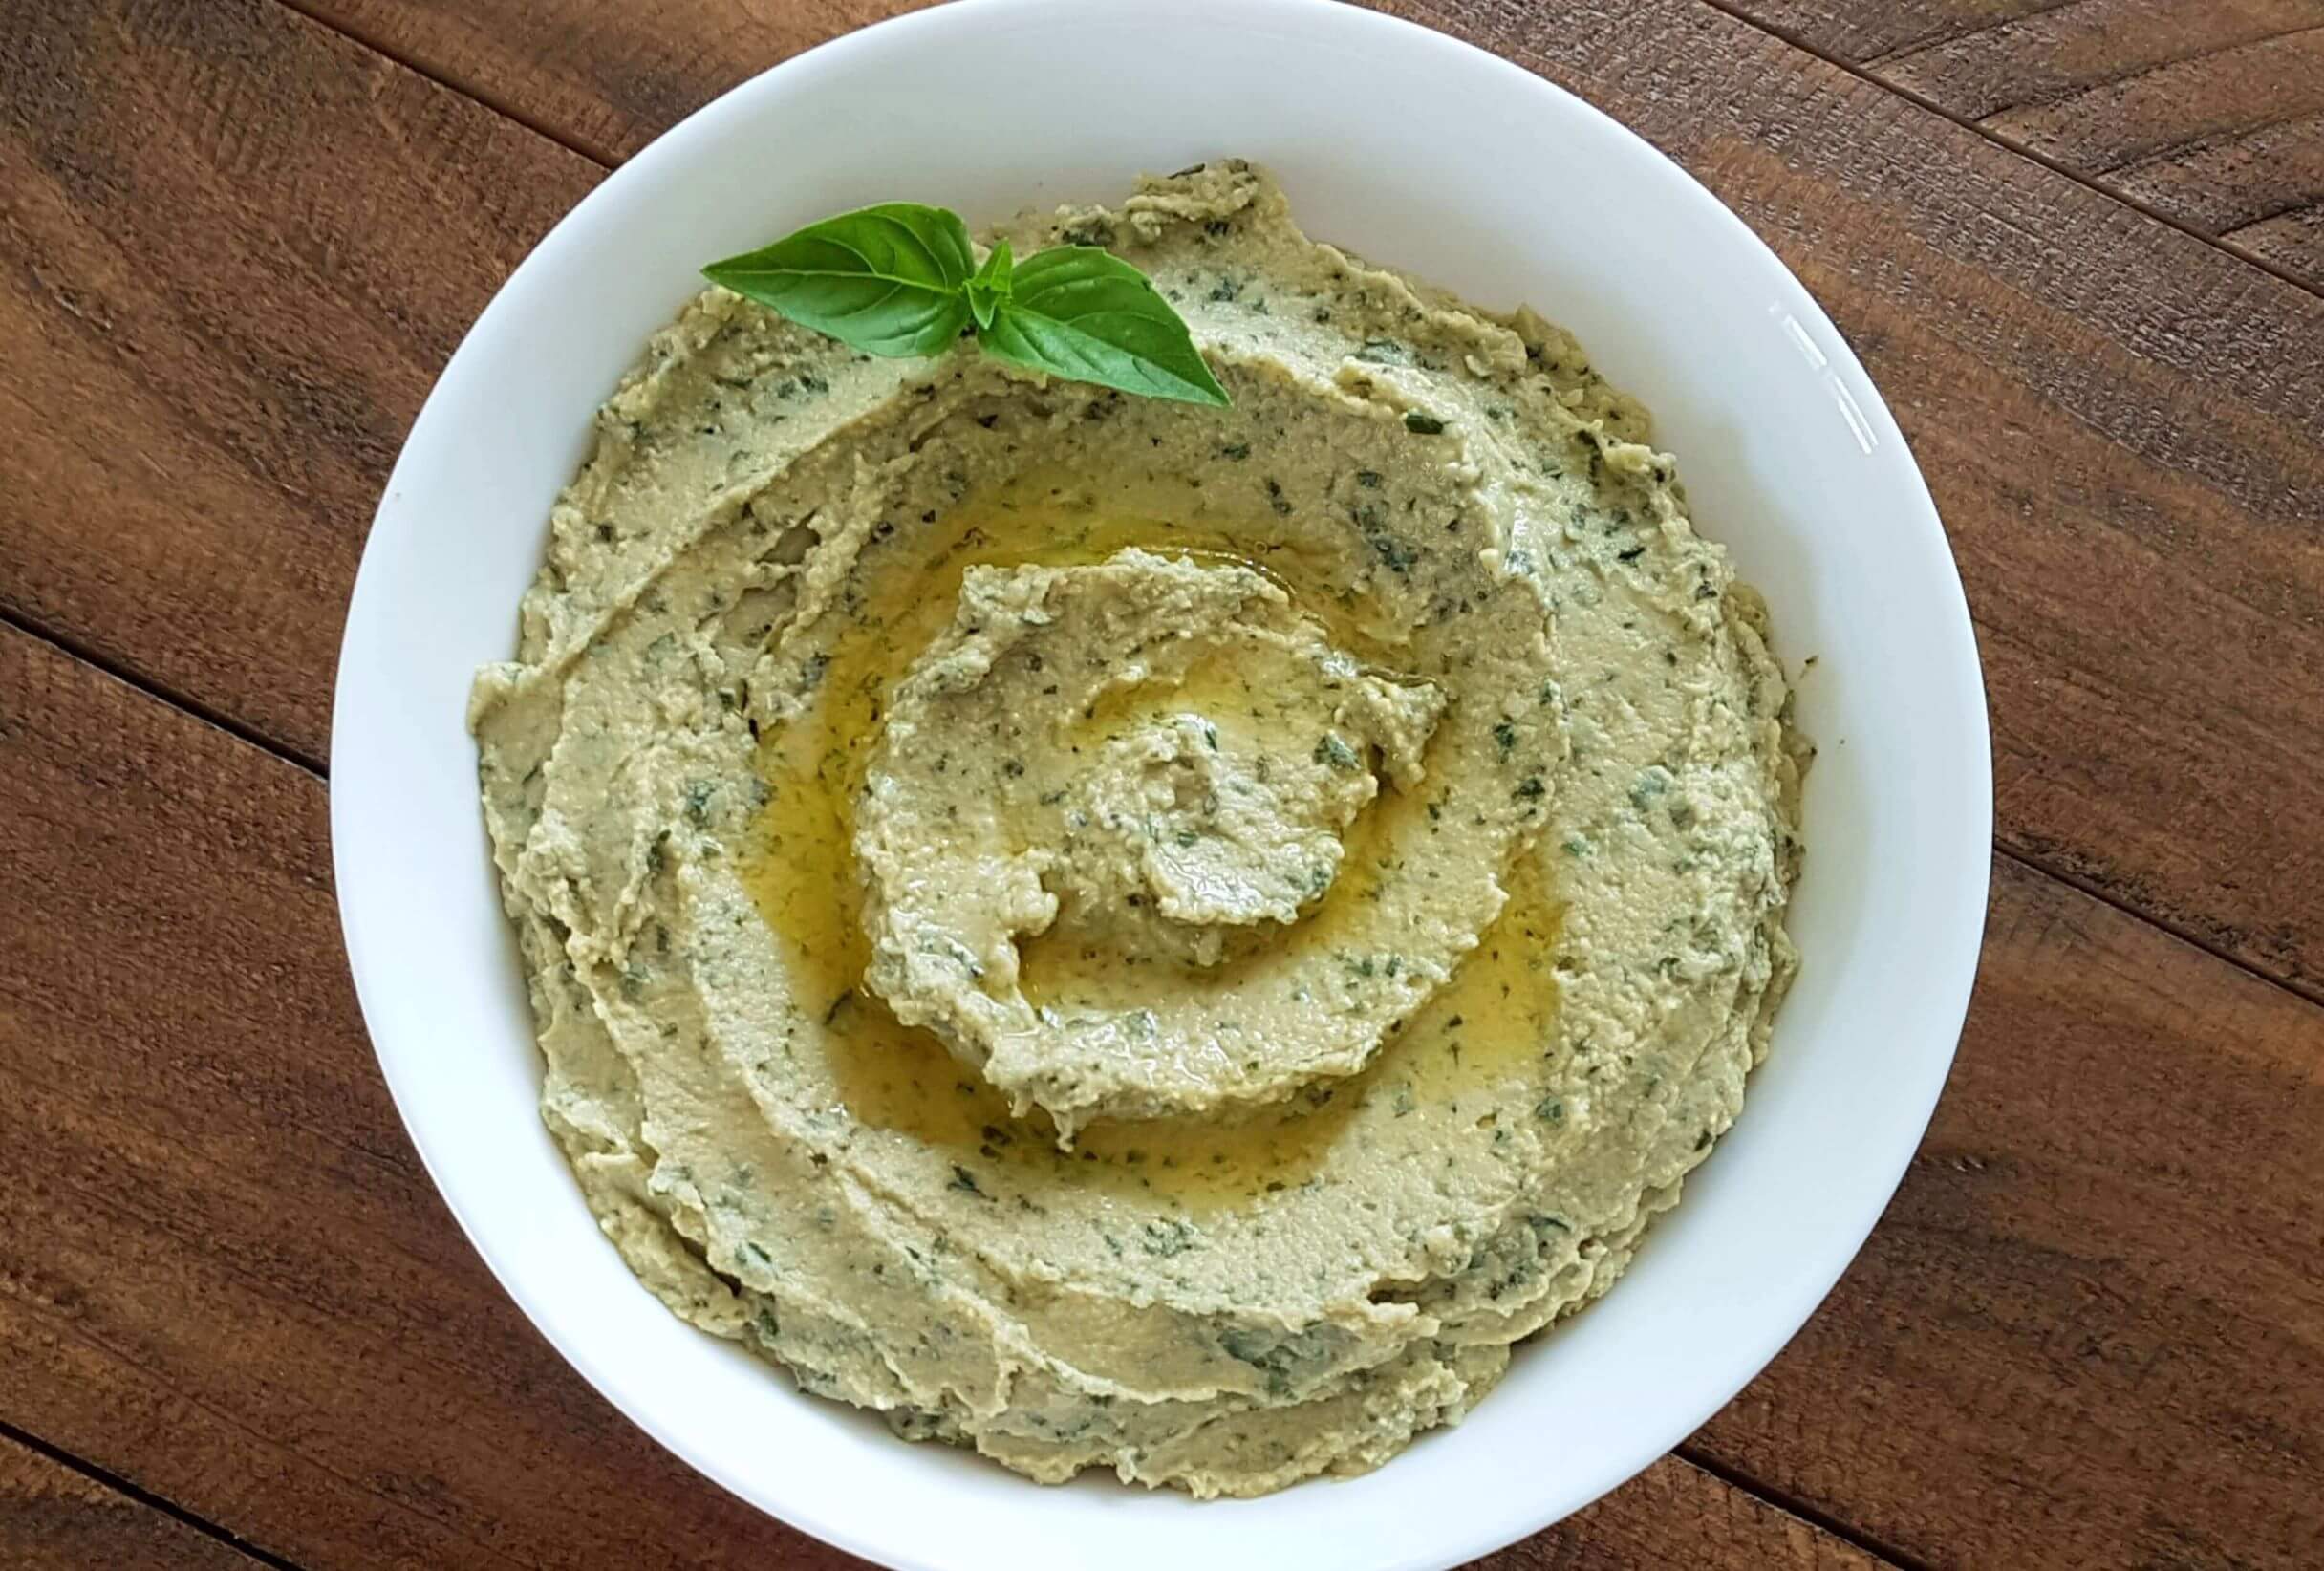 A plate of green basil hummus drizzled with olive oil, and garnished with basil leaves on the edge of the plate.